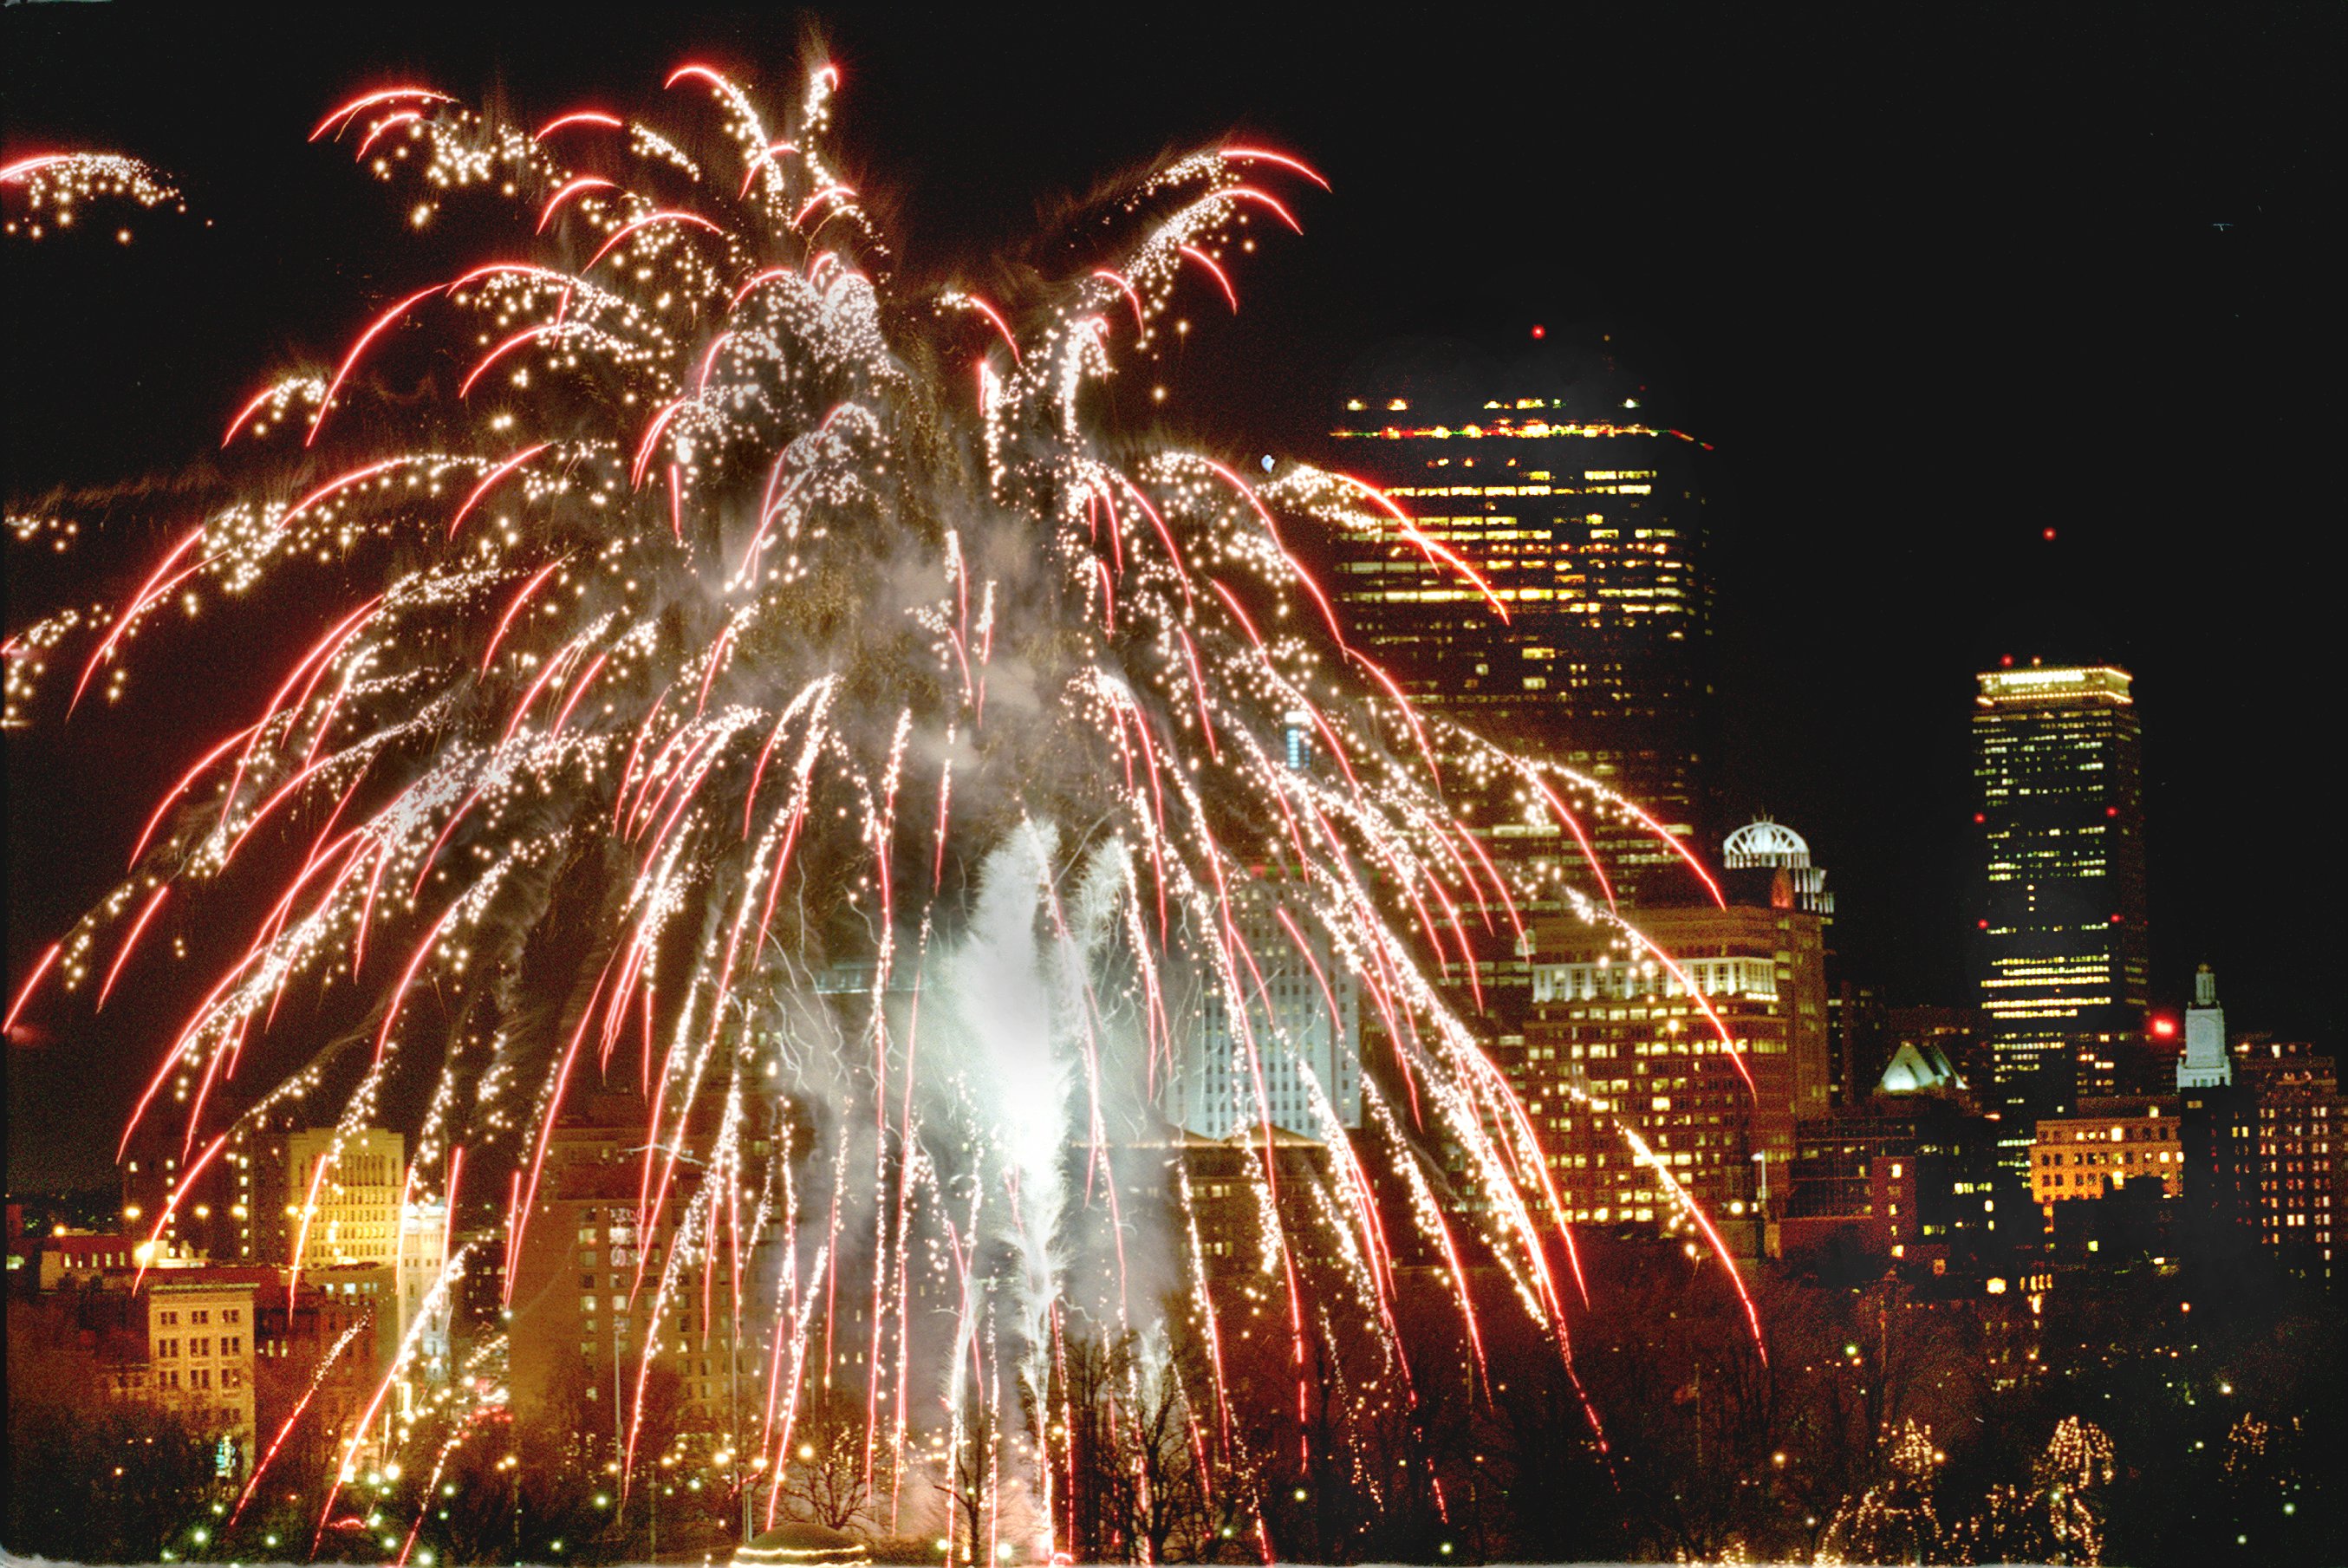 In canceled fireworks, some see a fitting end to 2020 The Boston Globe